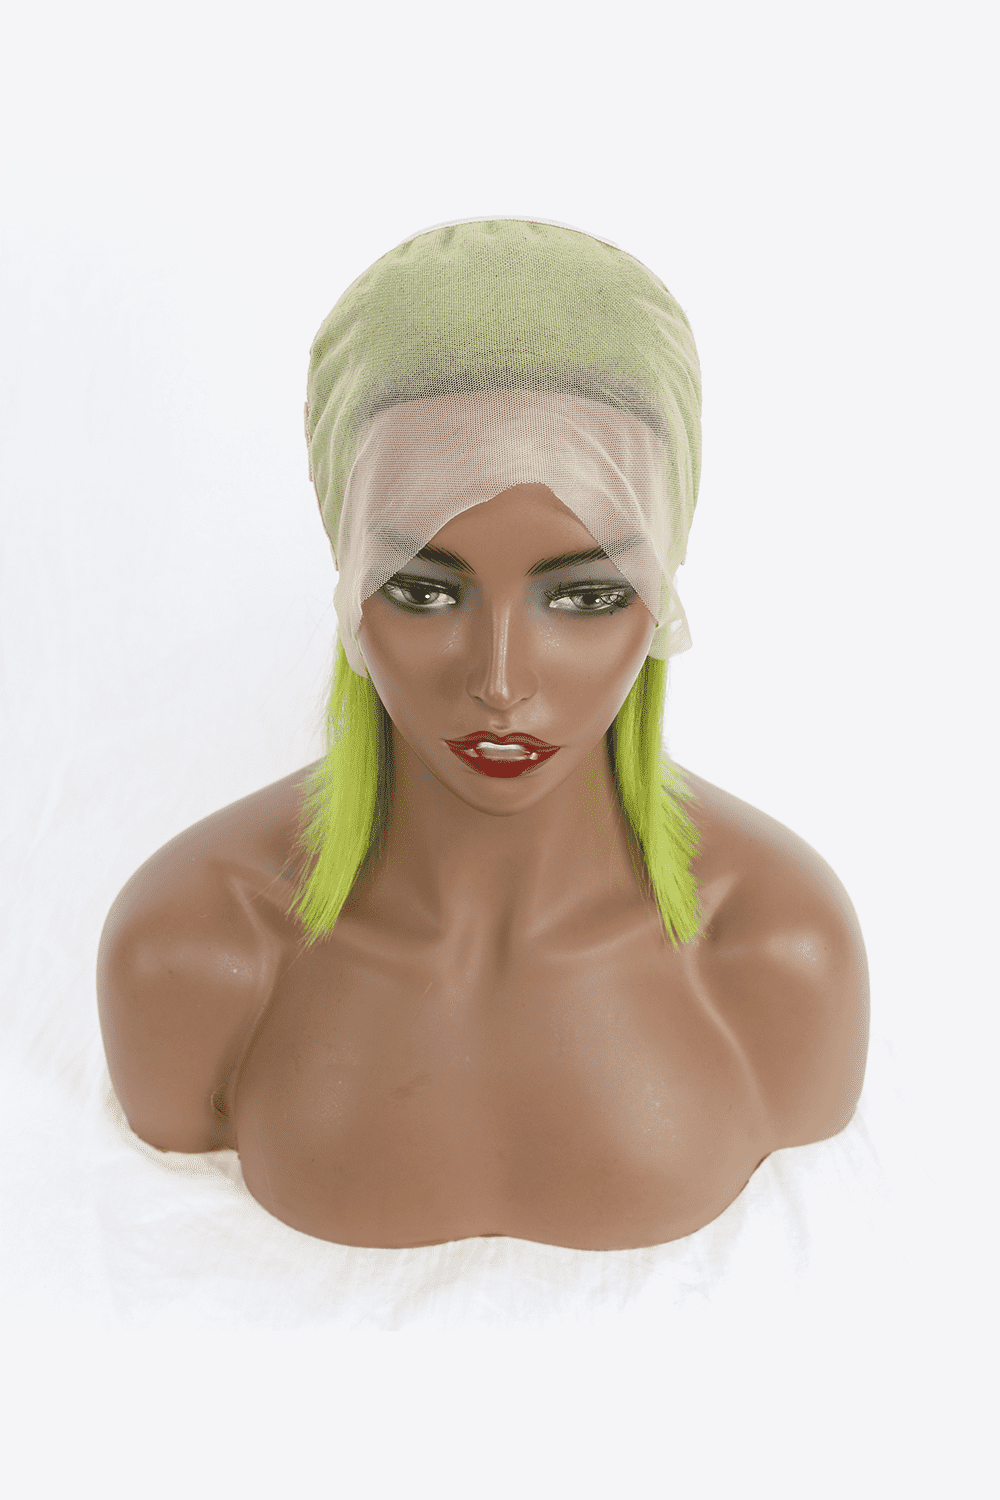 a mannequin head with a wig and green hair